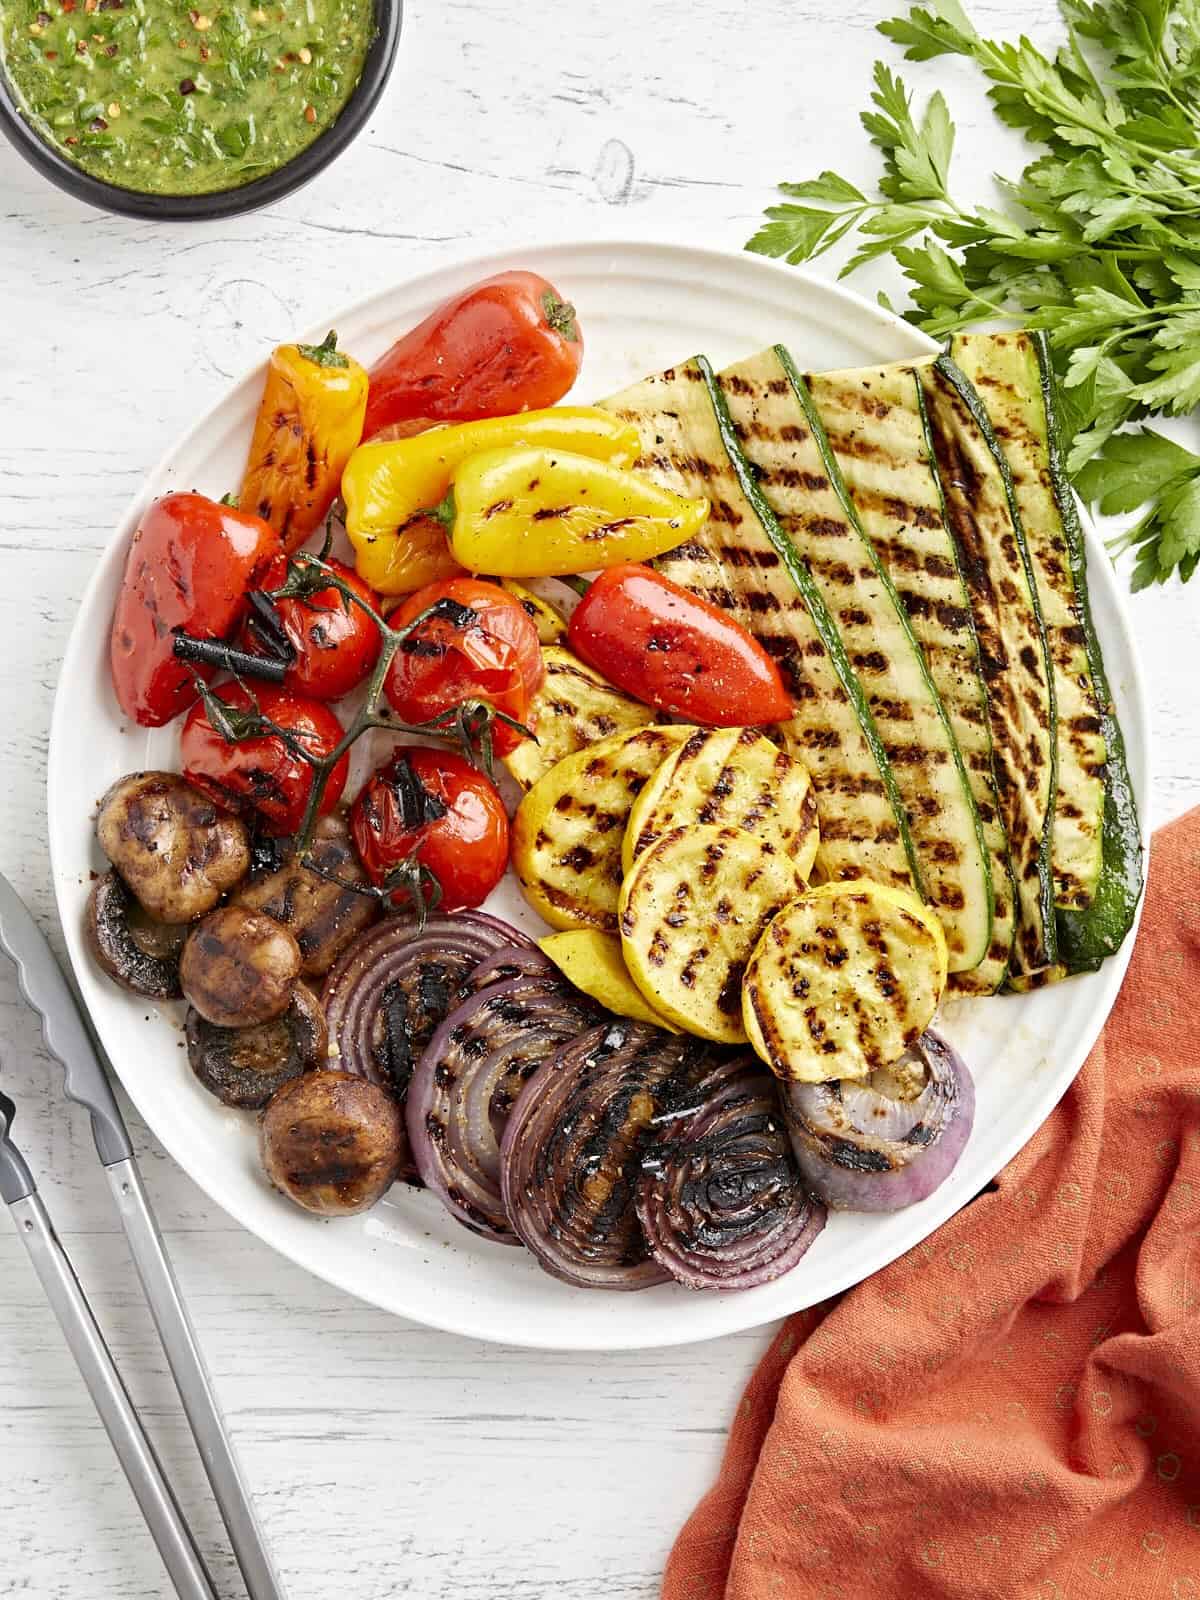 A plate of grilled vegetables.